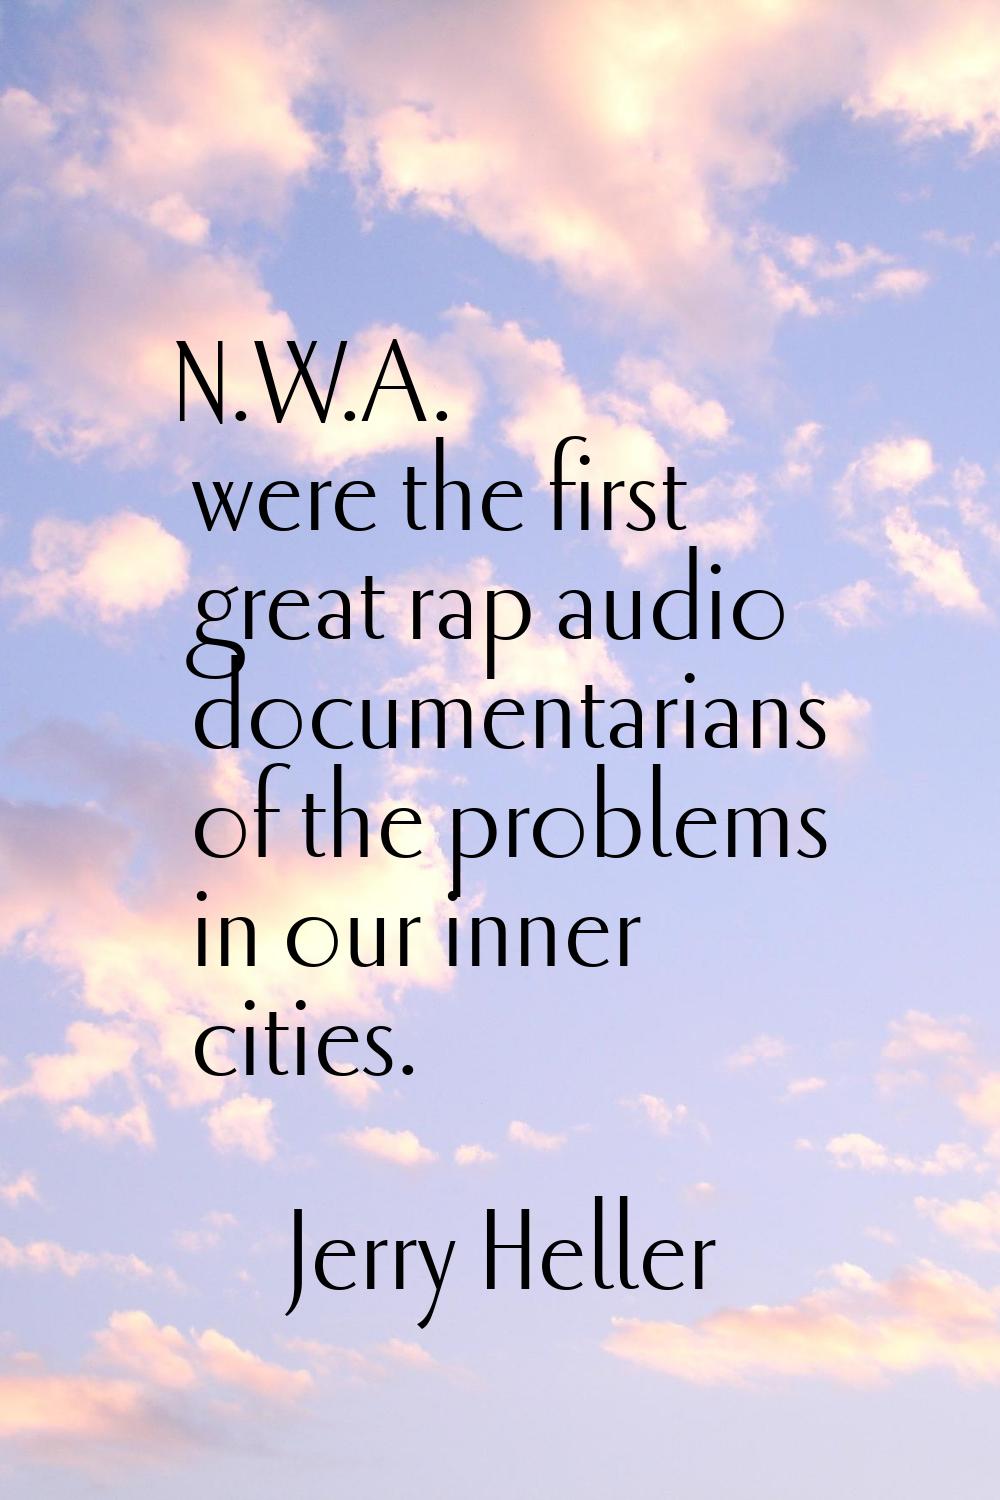 N.W.A. were the first great rap audio documentarians of the problems in our inner cities.